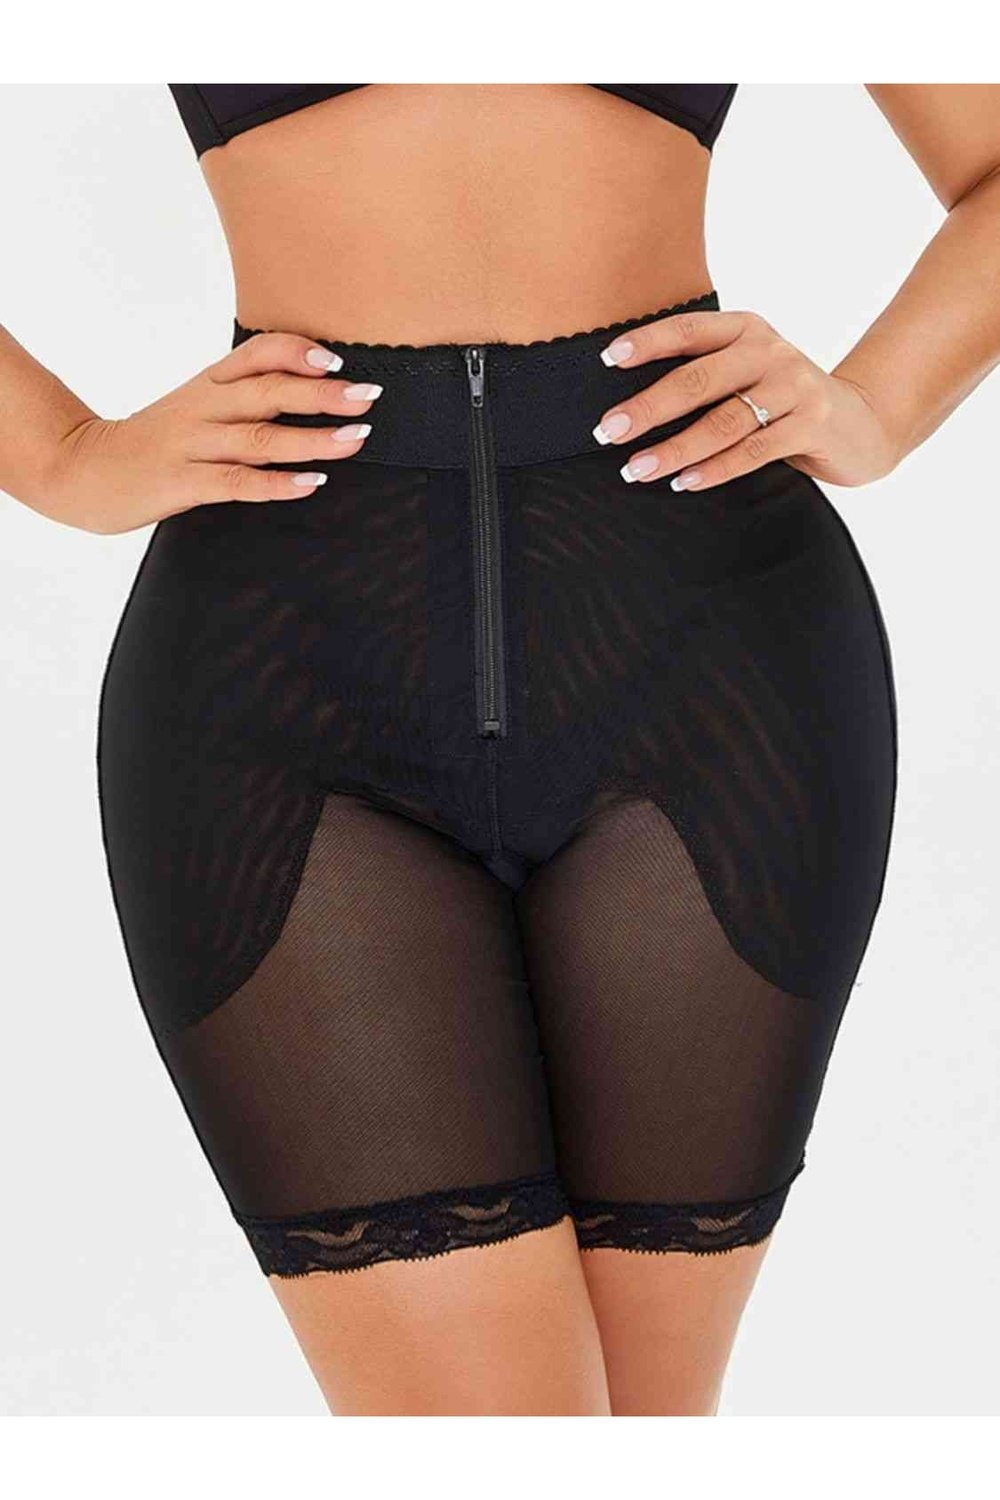 Full Size High-Waisted Lace Trim Shaping Shorts - Shapewear - FITGGINS